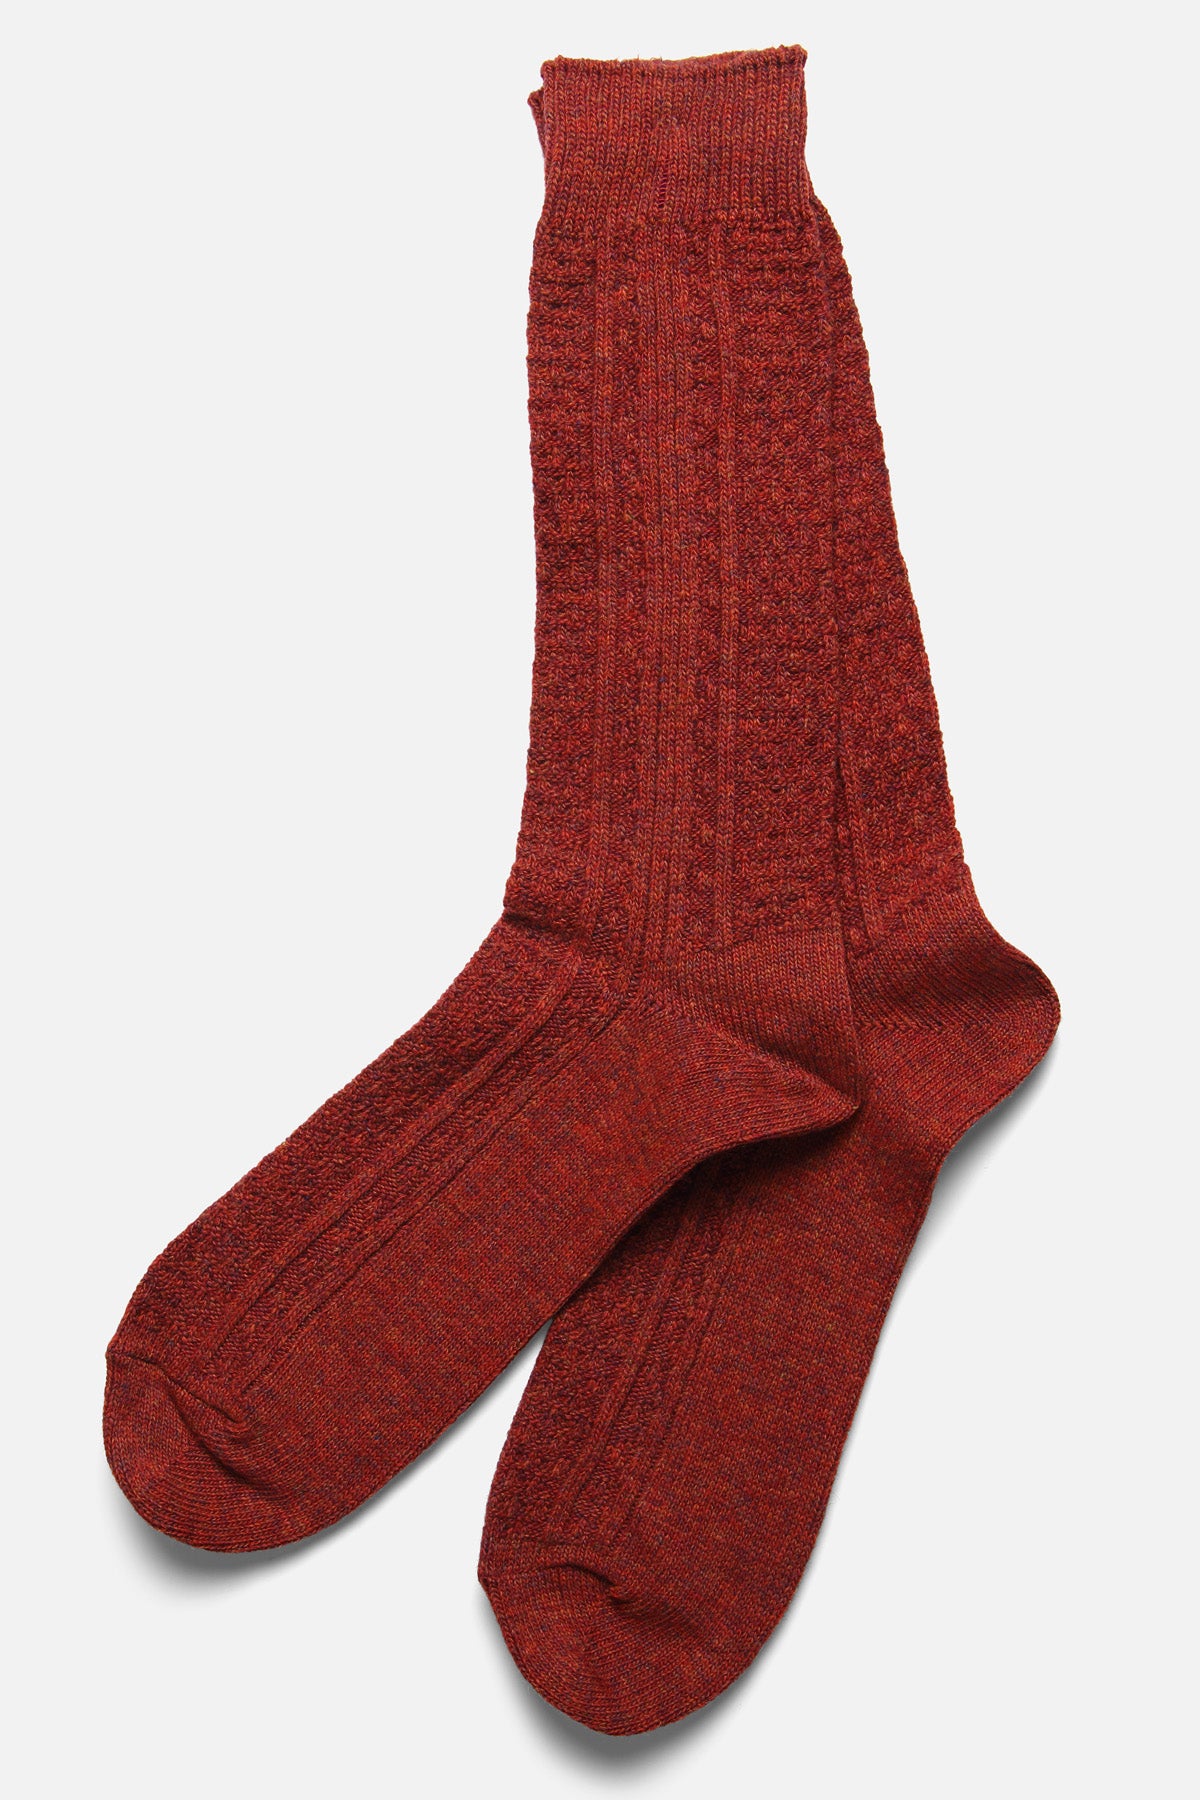 ANONYMOUS ISM - CASHMERE WOOL LINK CREW IN RED